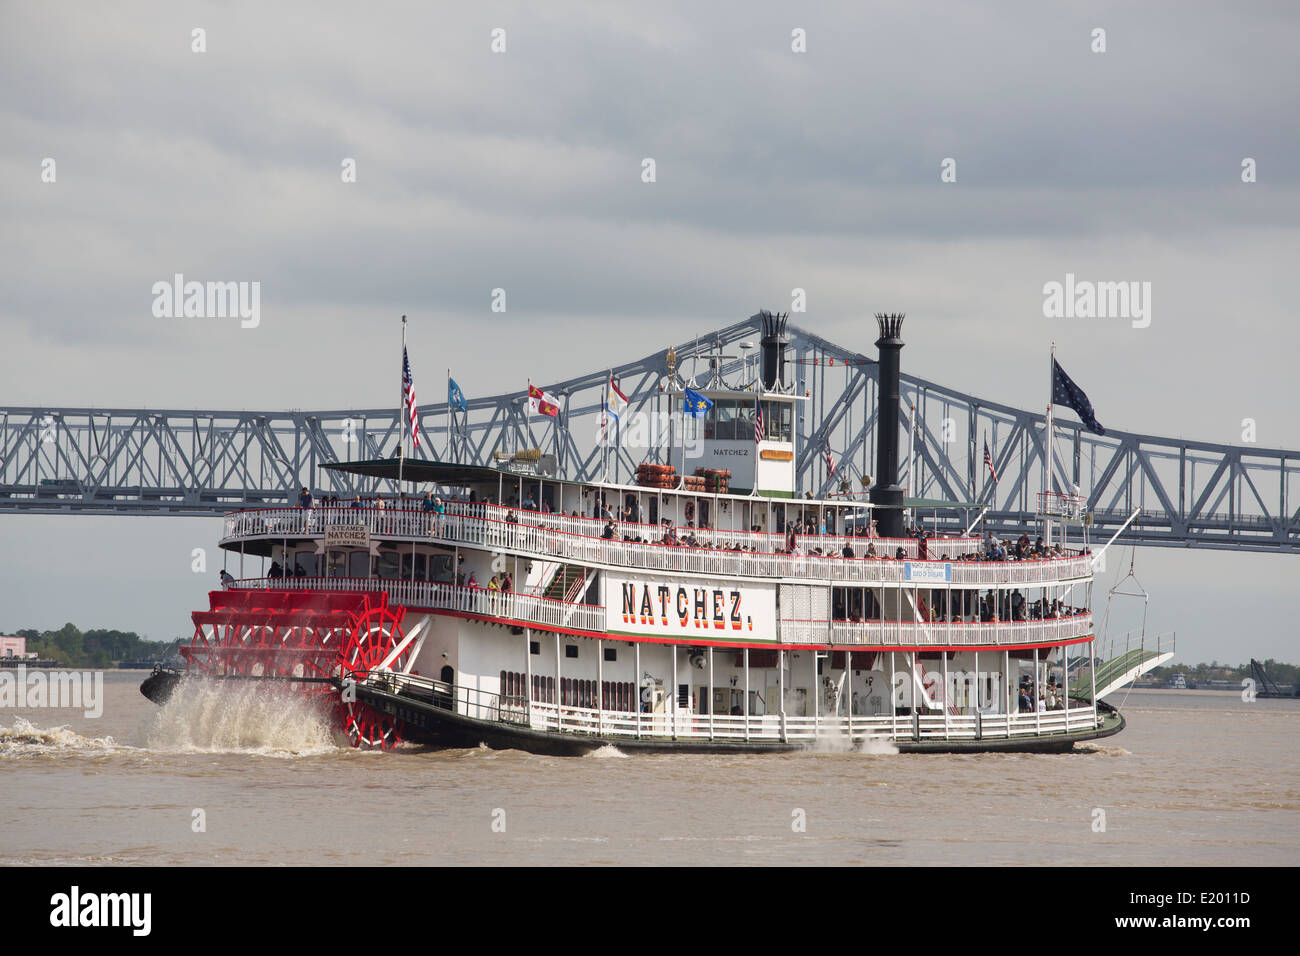 Natchez river boat is seen on the Mississippi River in New Orleans with a bridge in the background. Stock Photo